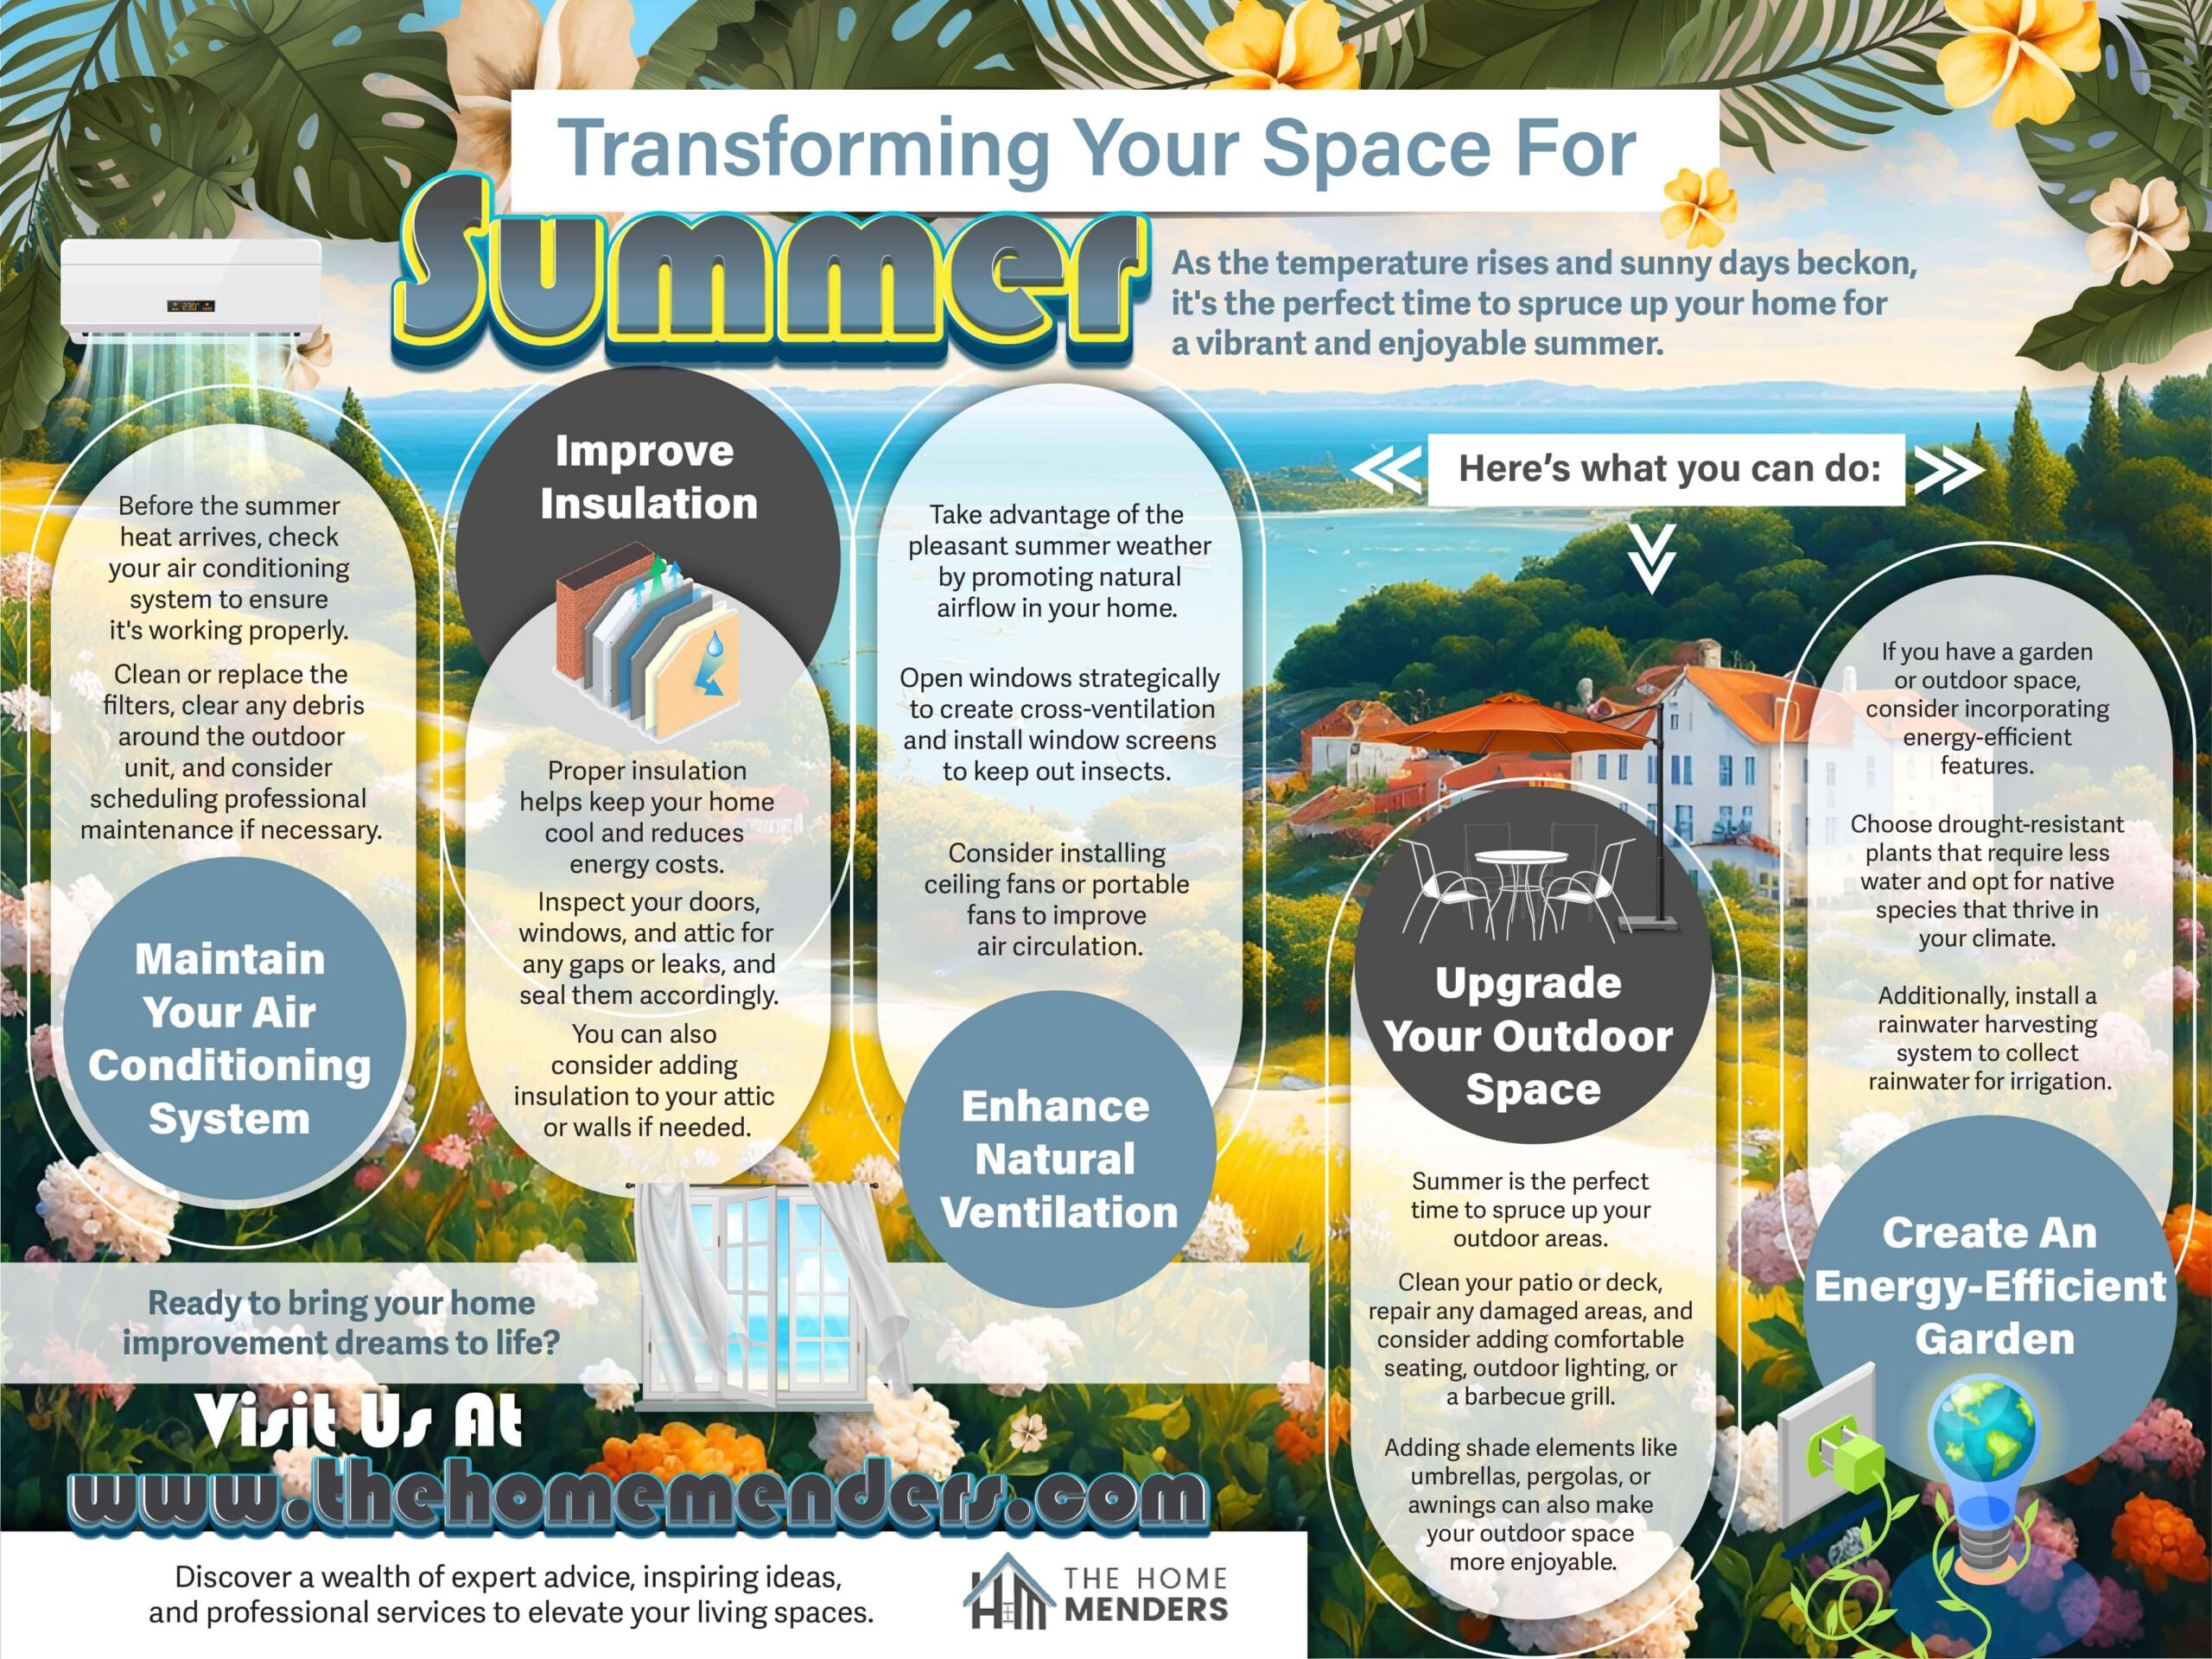 Transforming your space for Summer